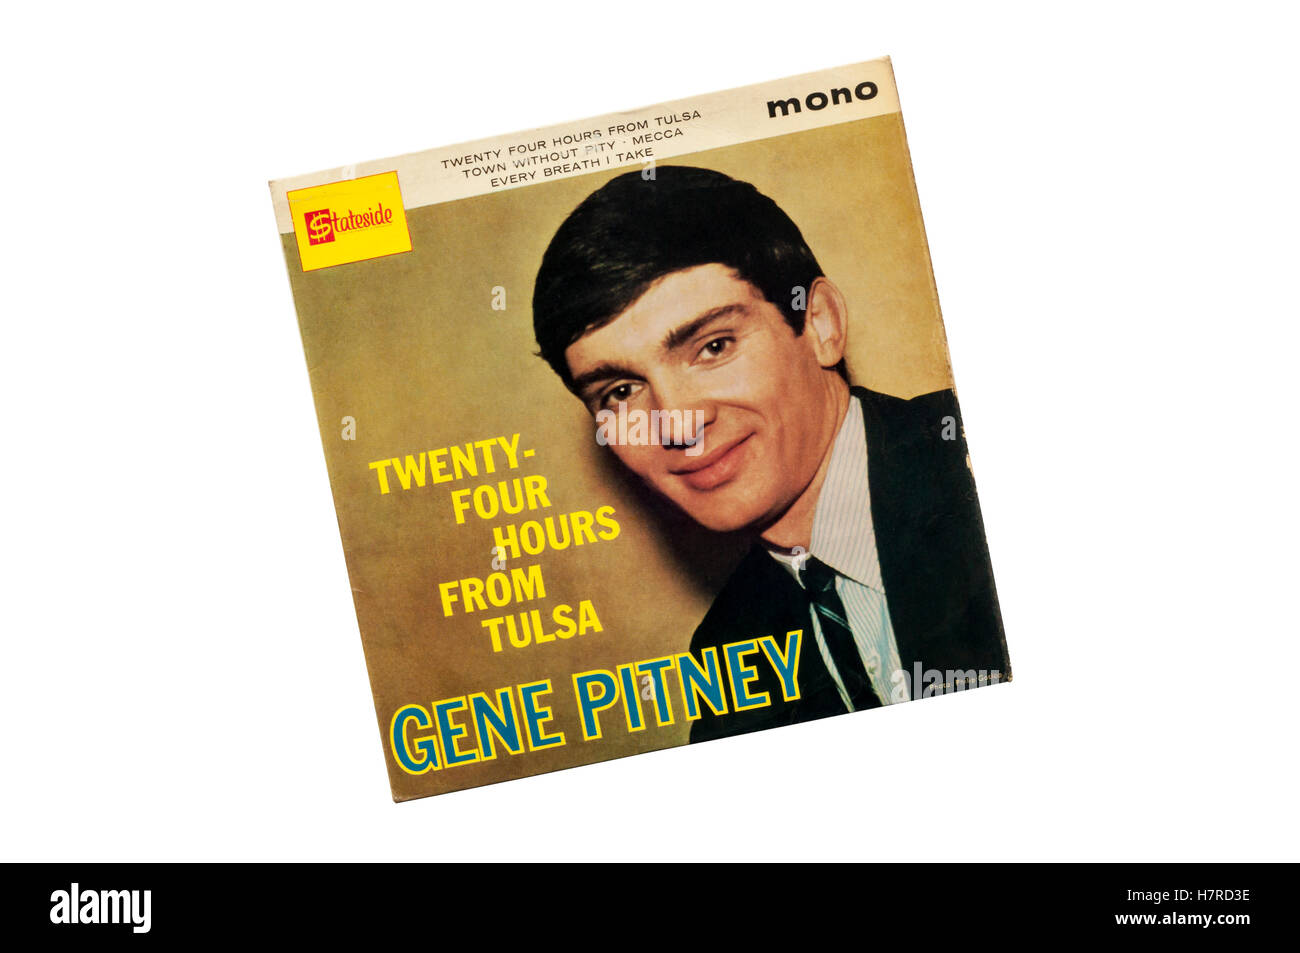 Twenty-Four Hours From Tulsa EP by Gene Pitney released in 1964. Stock Photo